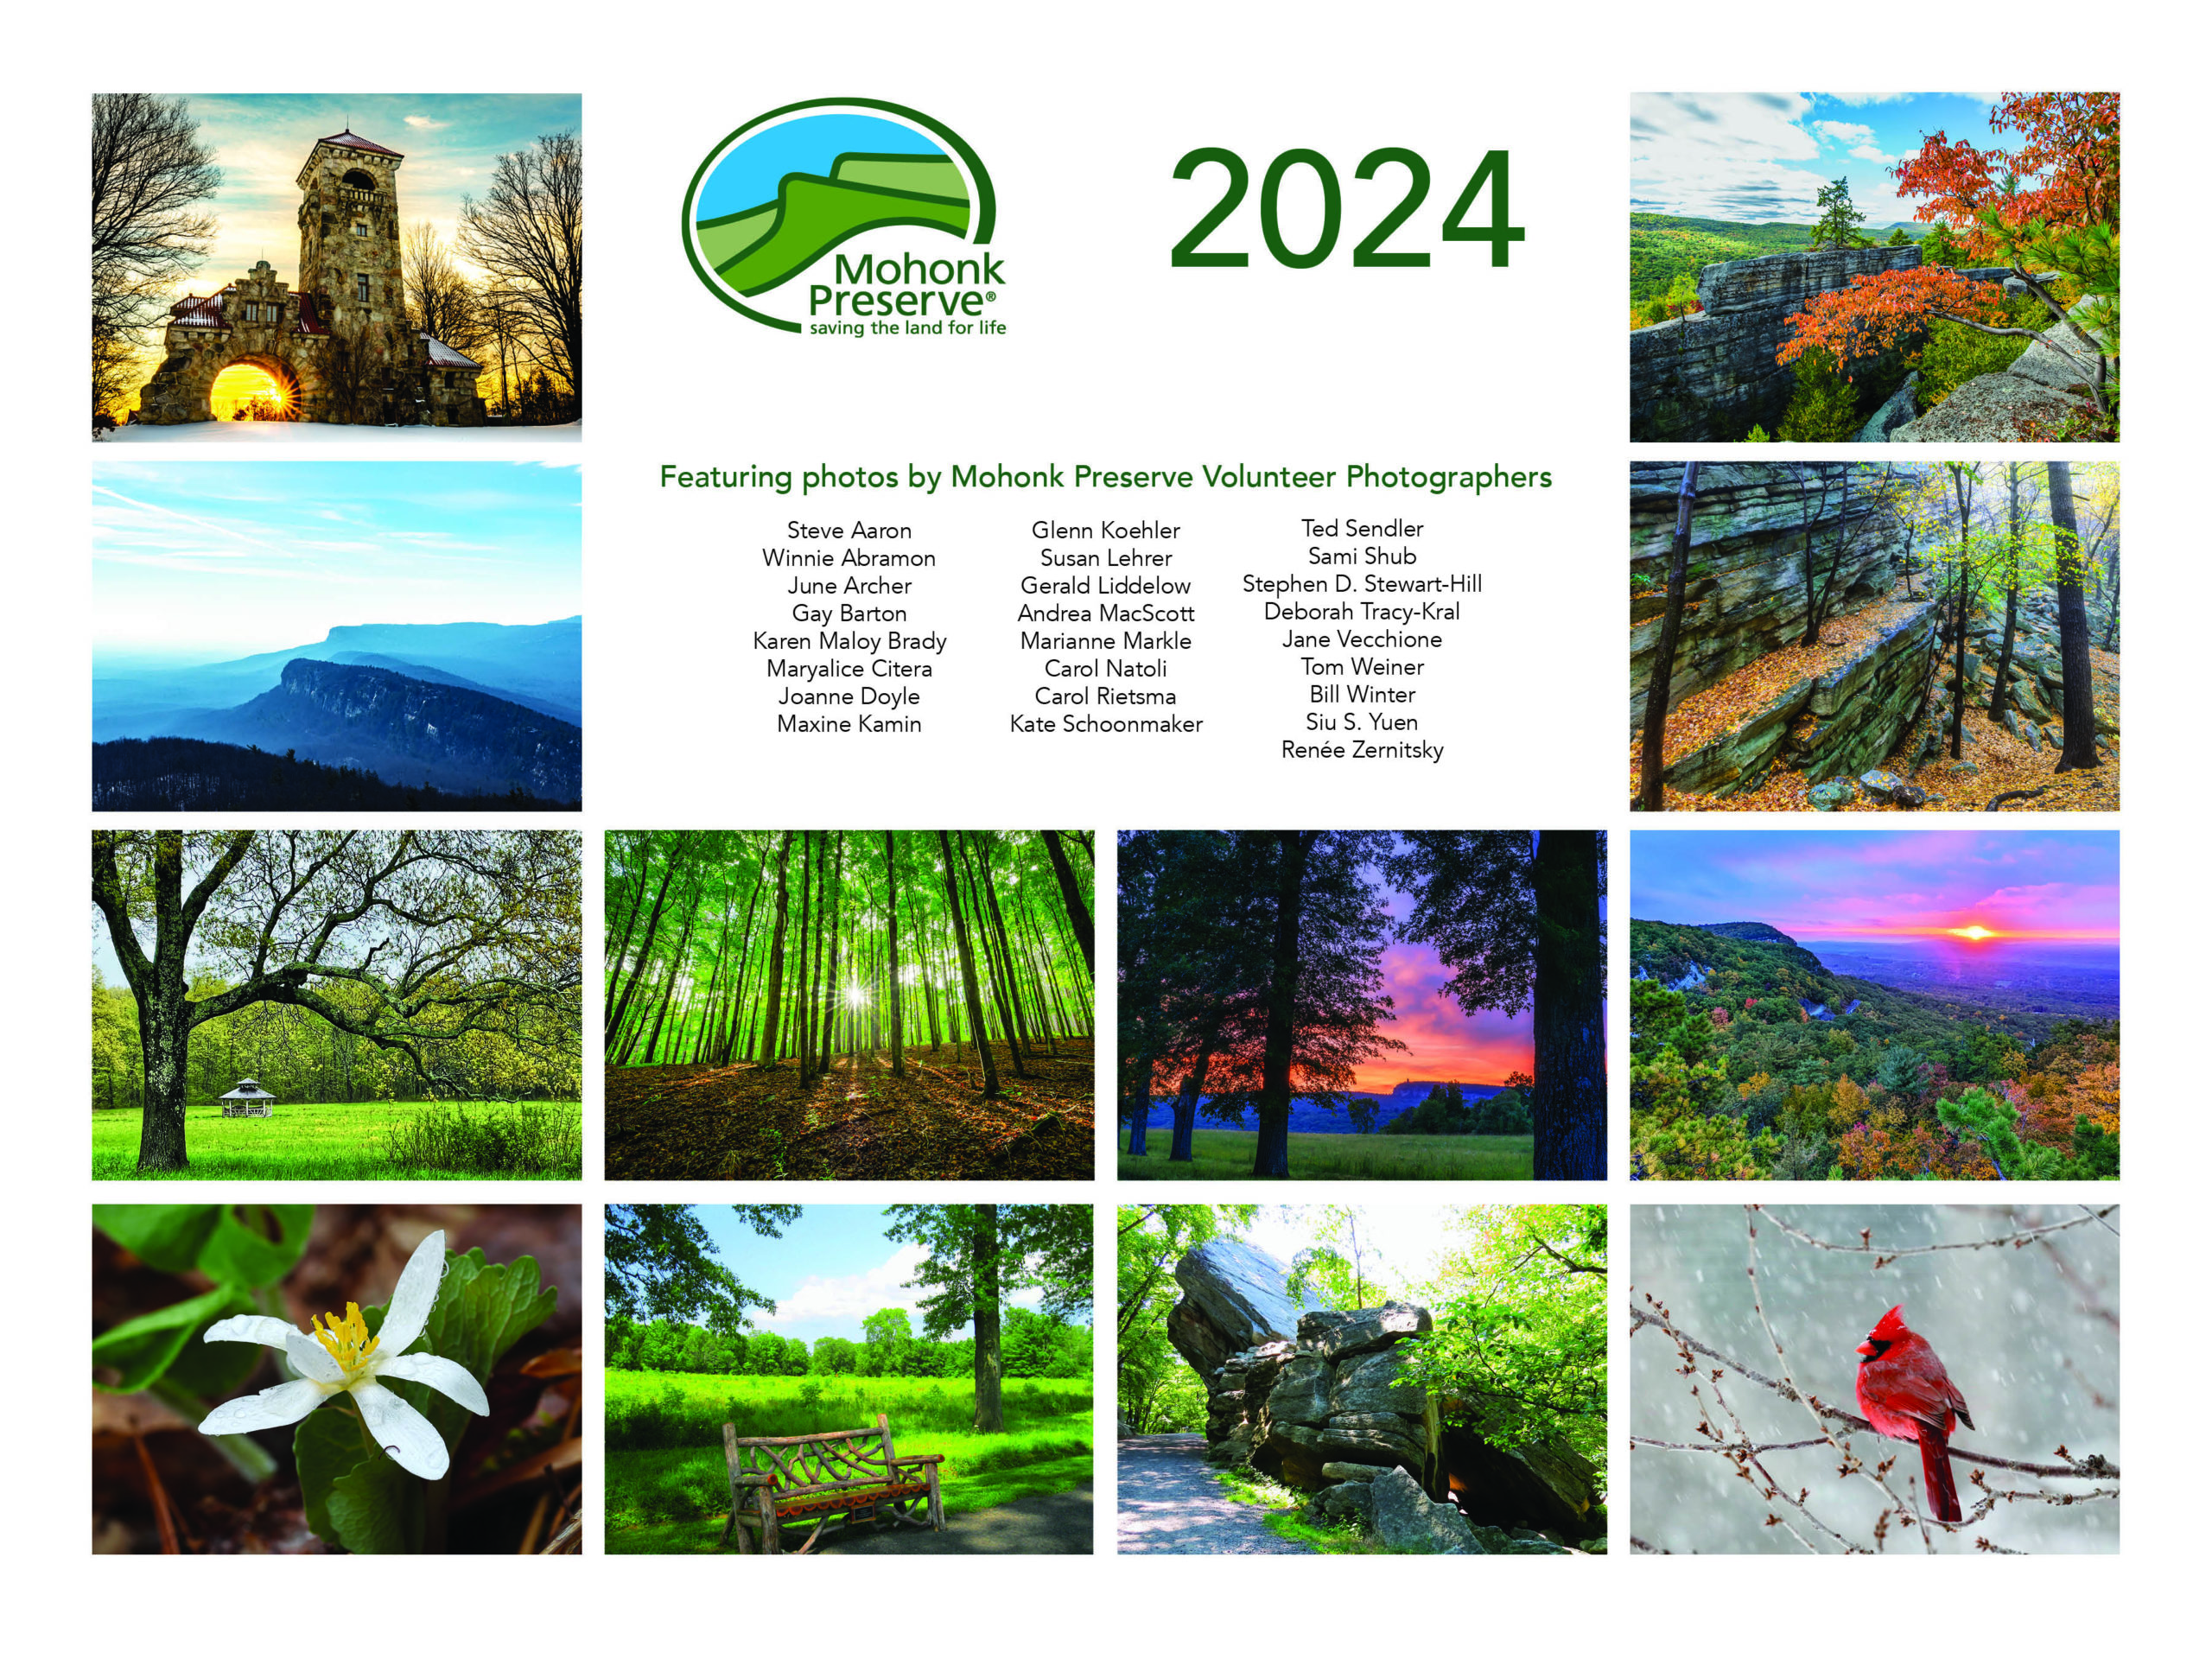 Beautiful scenic shots from Mohonk Preserve and the Shawangunk Ridge in the hudson valley new york from the 2024 calendar.